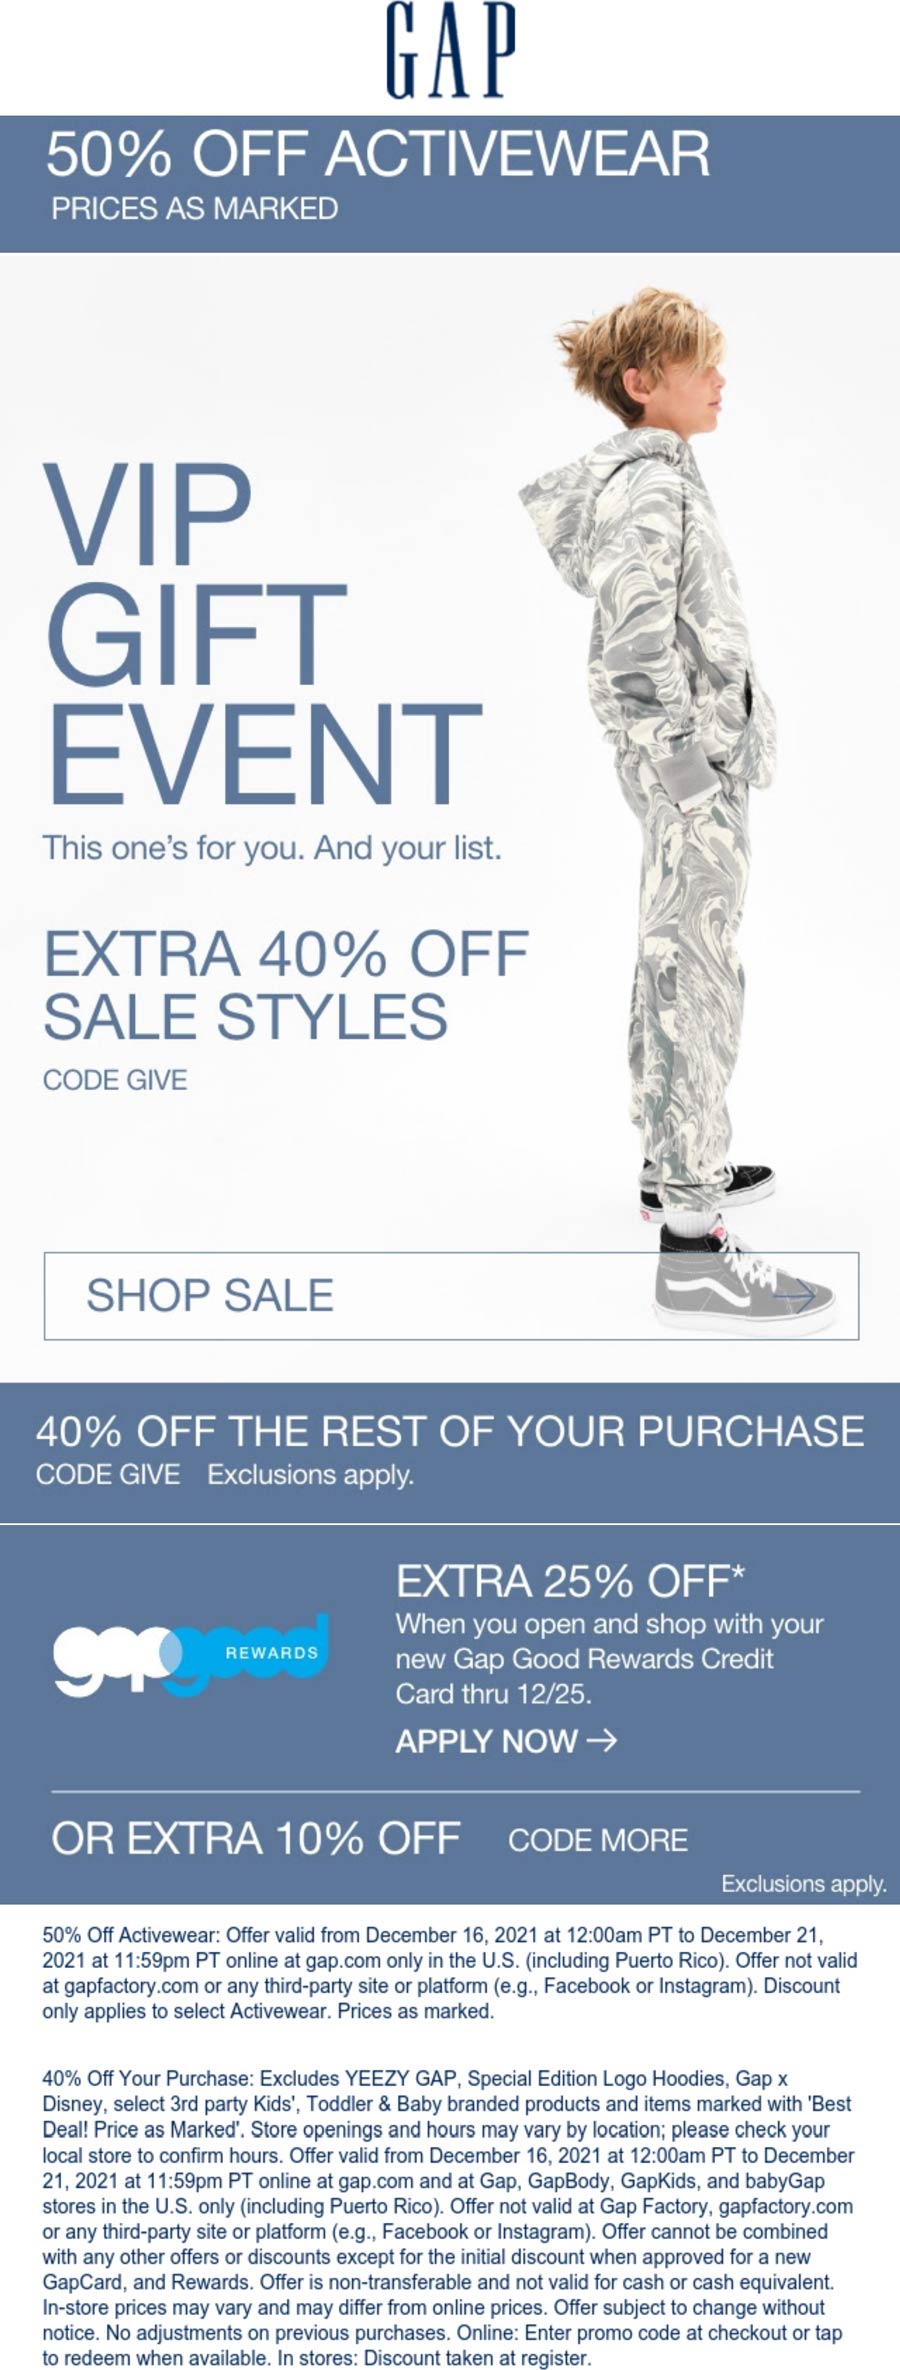 Gap stores Coupon  50% off activewear & 40% everything else online today at Gap via promo code GIVE #gap 